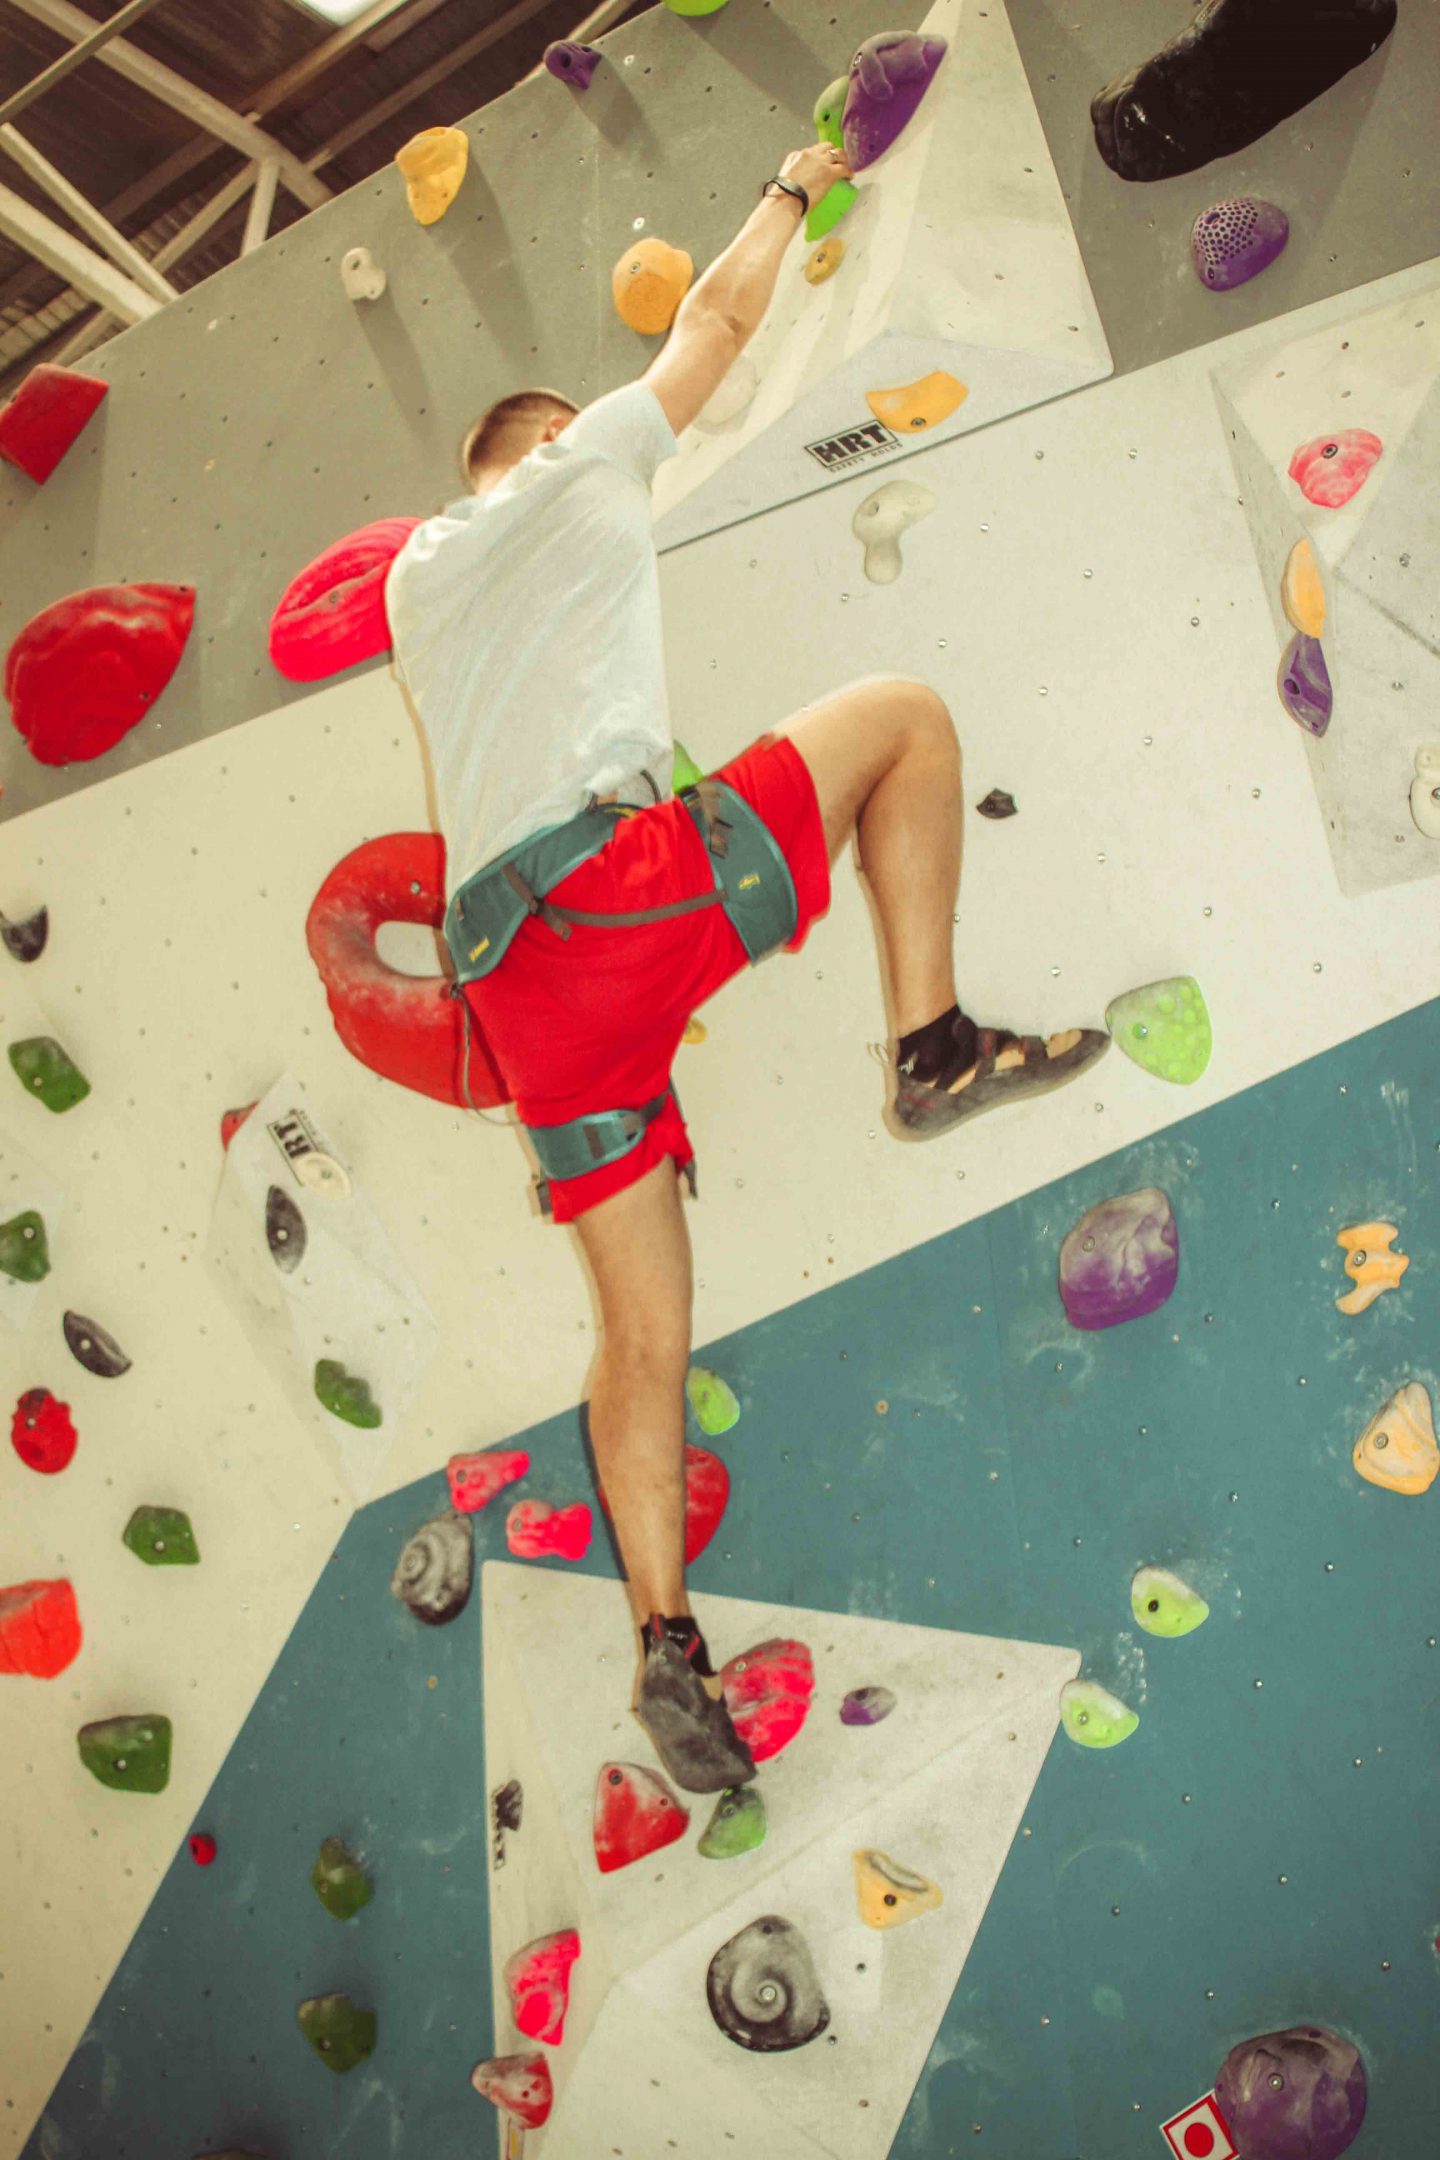 Indoor Rock Climbing for kids - a mix of fun and exercise